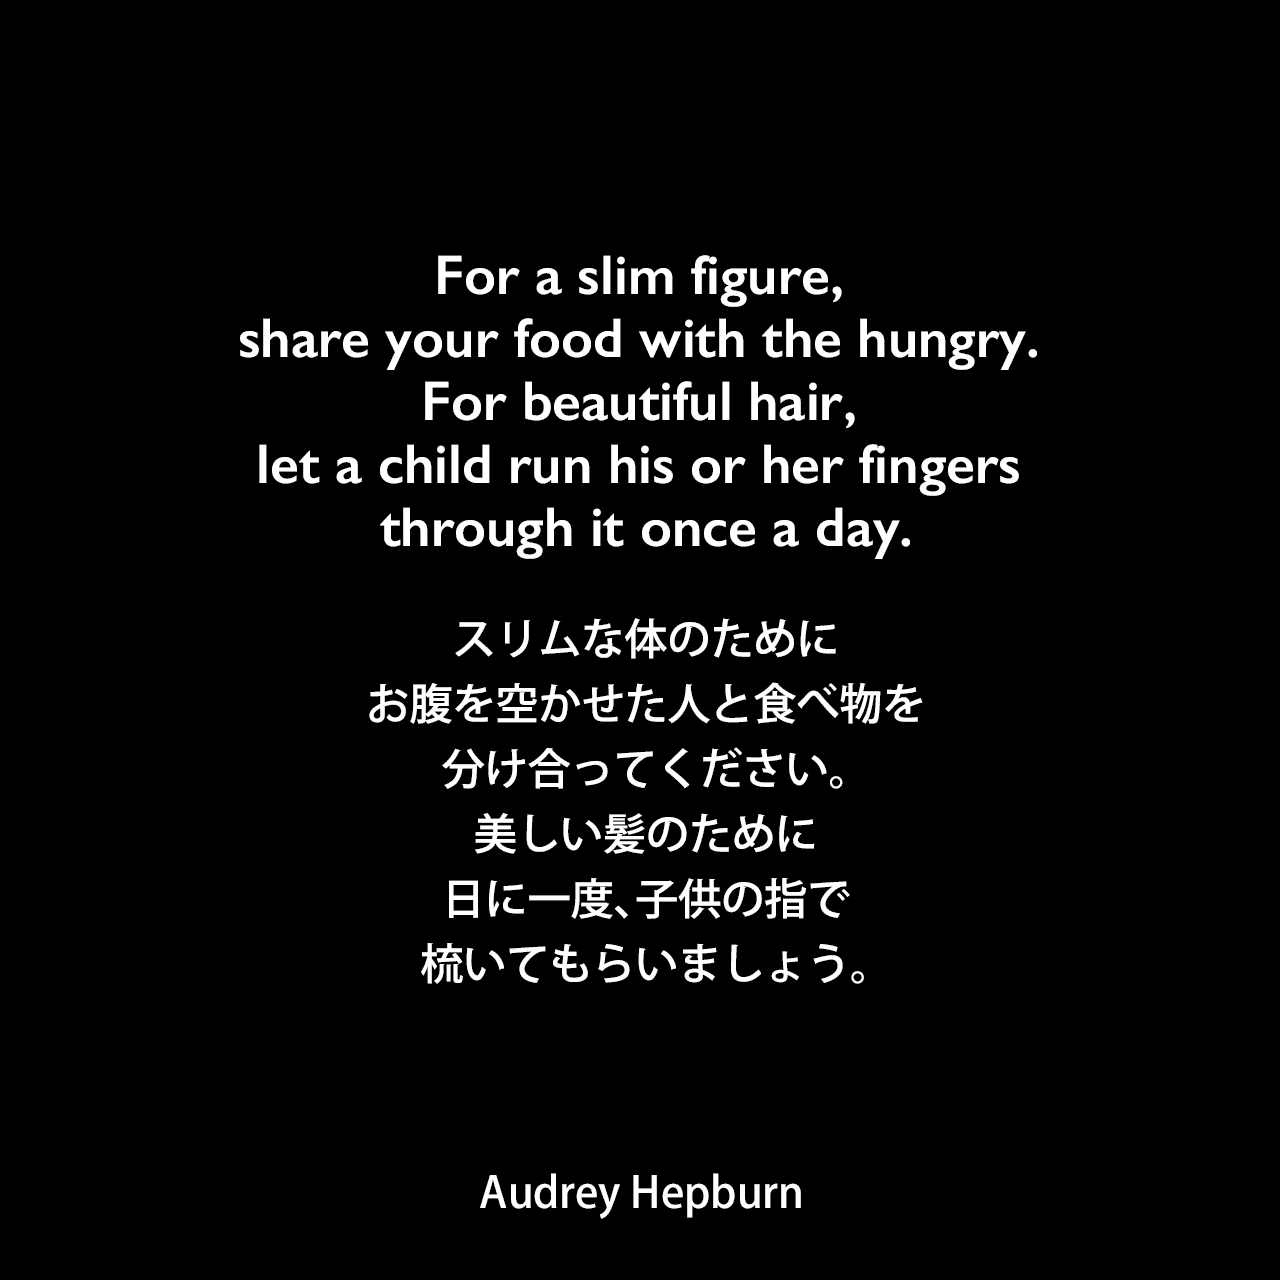 For a slim figure, share your food with the hungry. For beautiful hair, let a child run his or her fingers through it once a day.スリムな体のために、お腹を空かせた人と食べ物を分け合ってください。美しい髪のために、日に一度、子供の指で梳いてもらいましょう。Audrey Hepburn